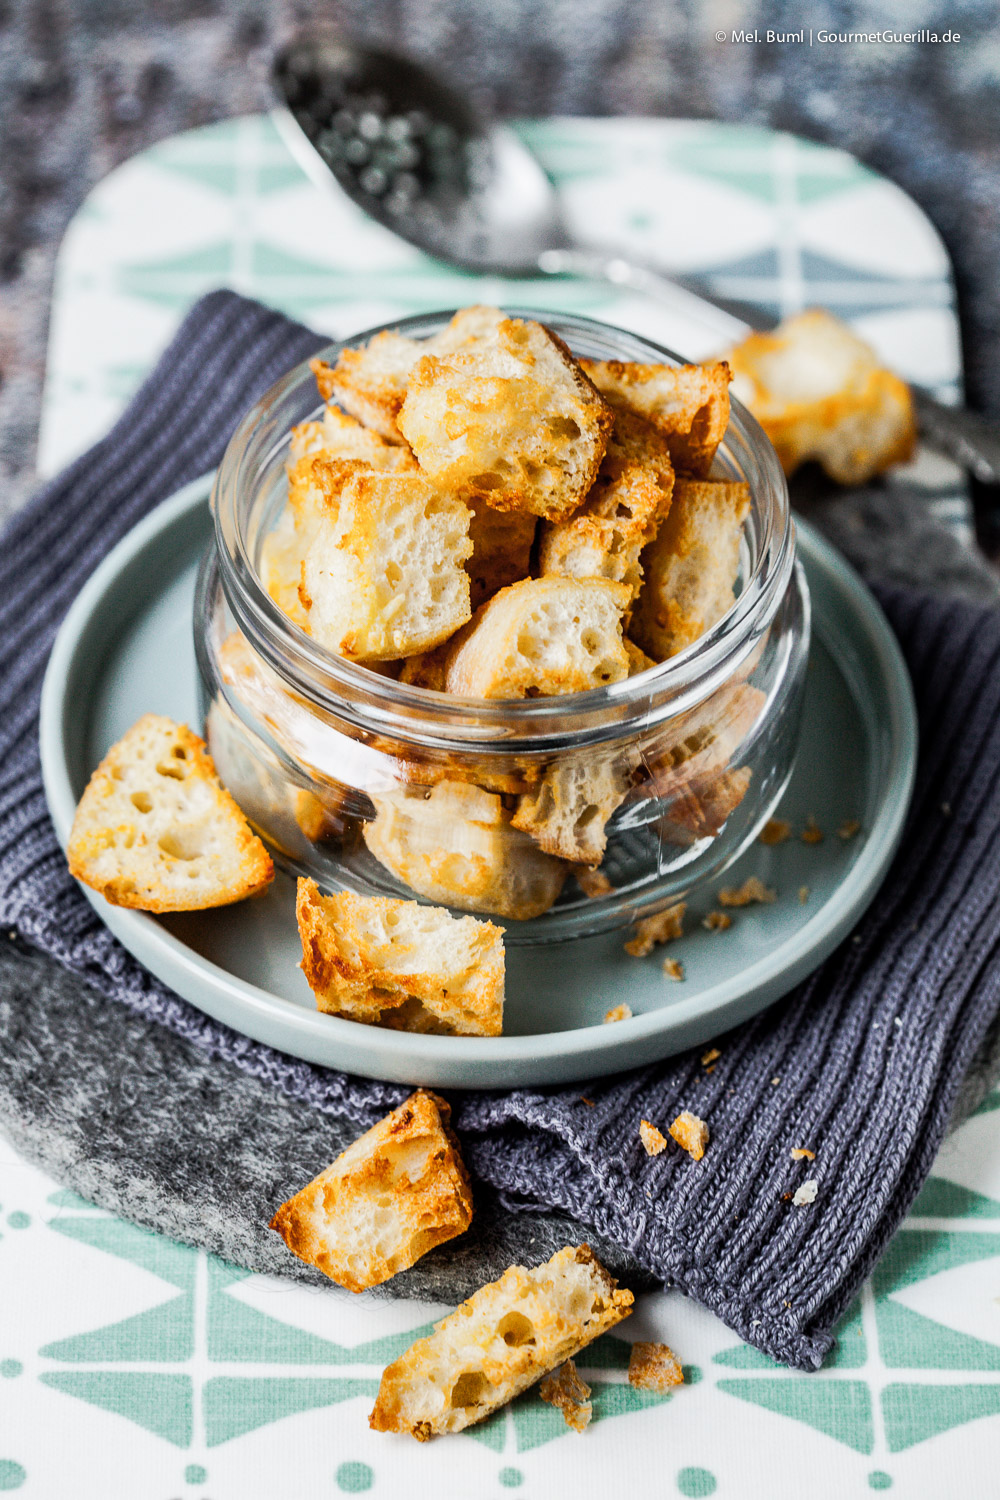 Selected 5-minute garlic croutons from the airfryer - low-fat and quickly finished | GourmetGuerilla.de